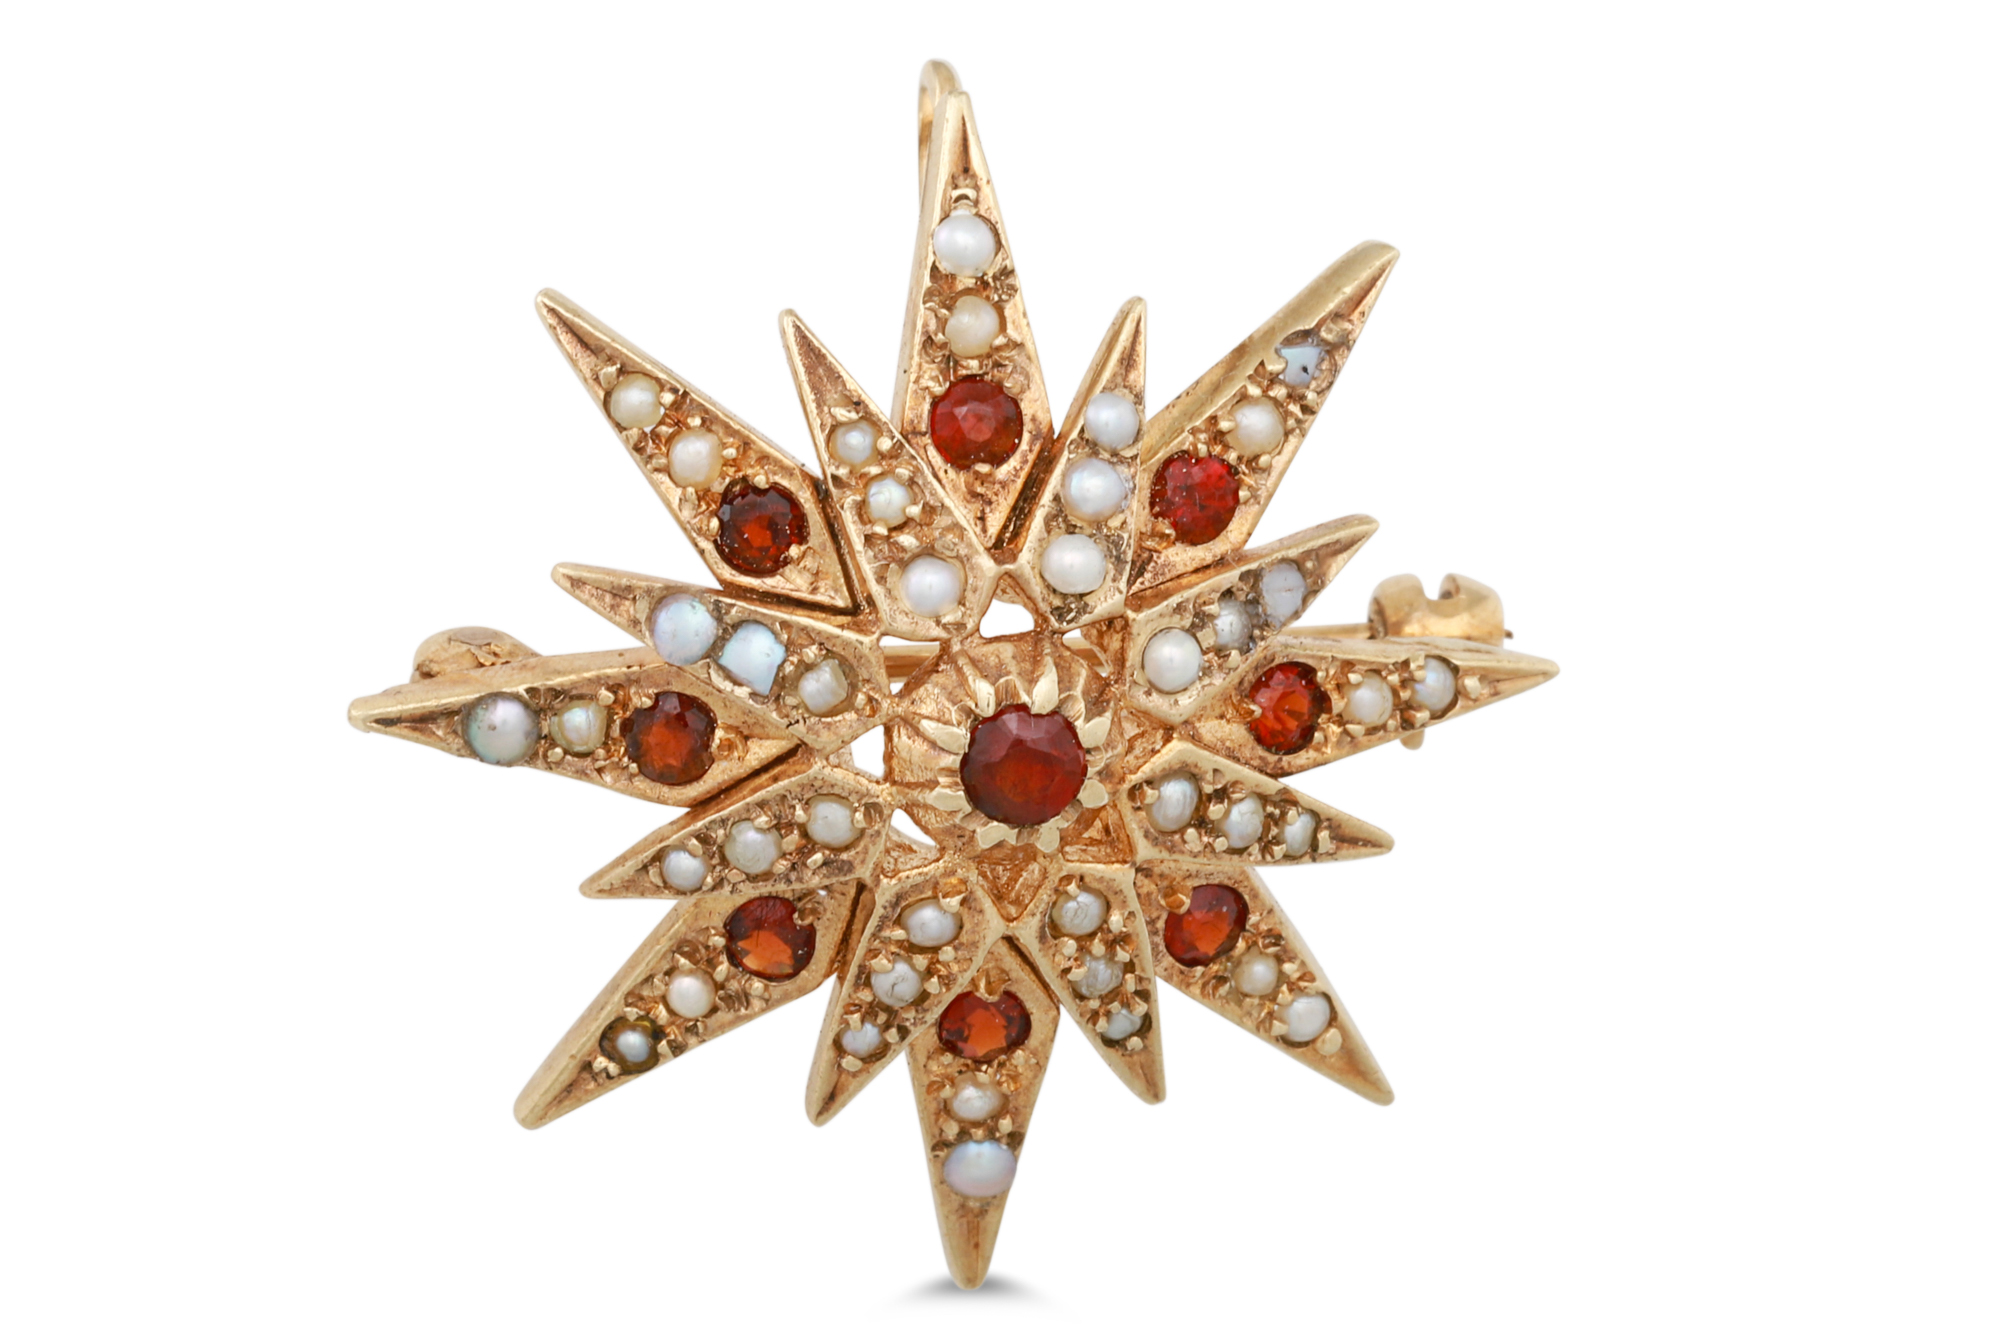 A GARNET AND SEED PEARL BROOCH, in the form of a star, mounted in 9ct gold